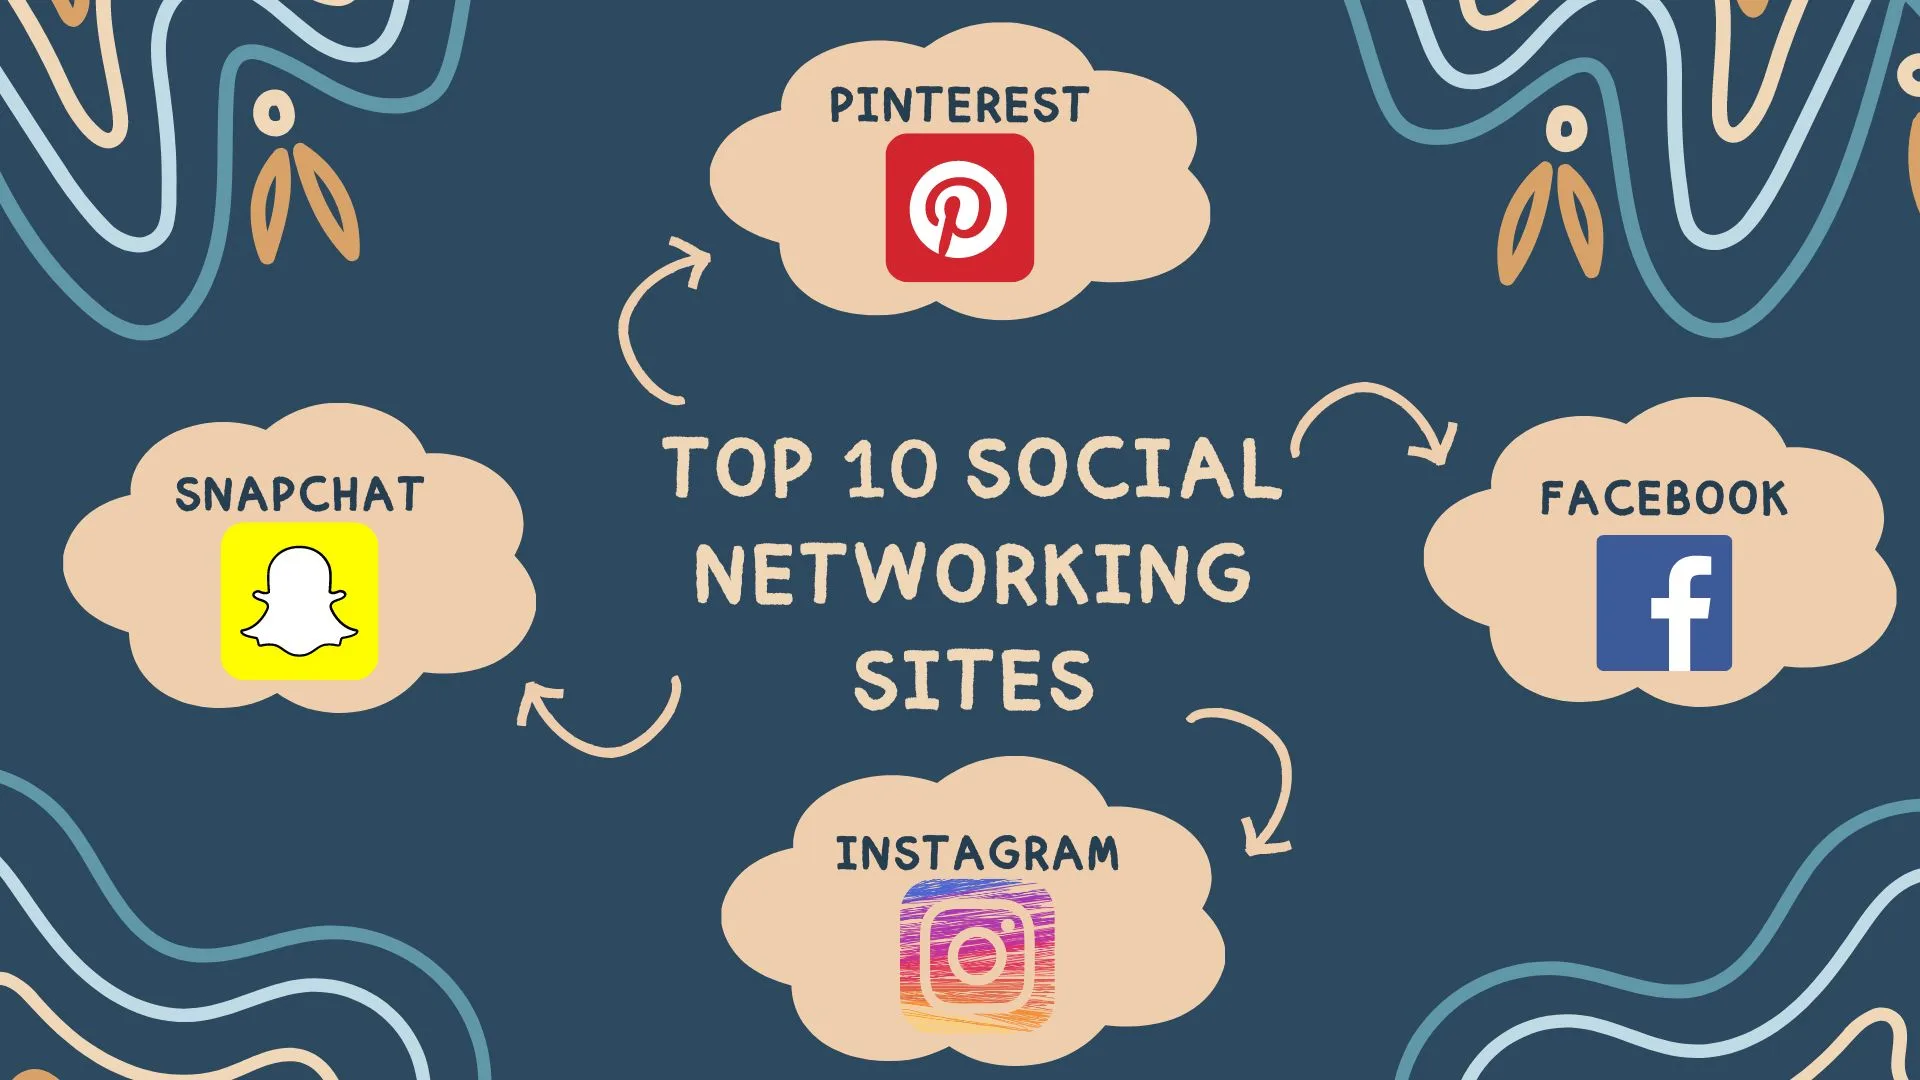 Top 10 social networking sites